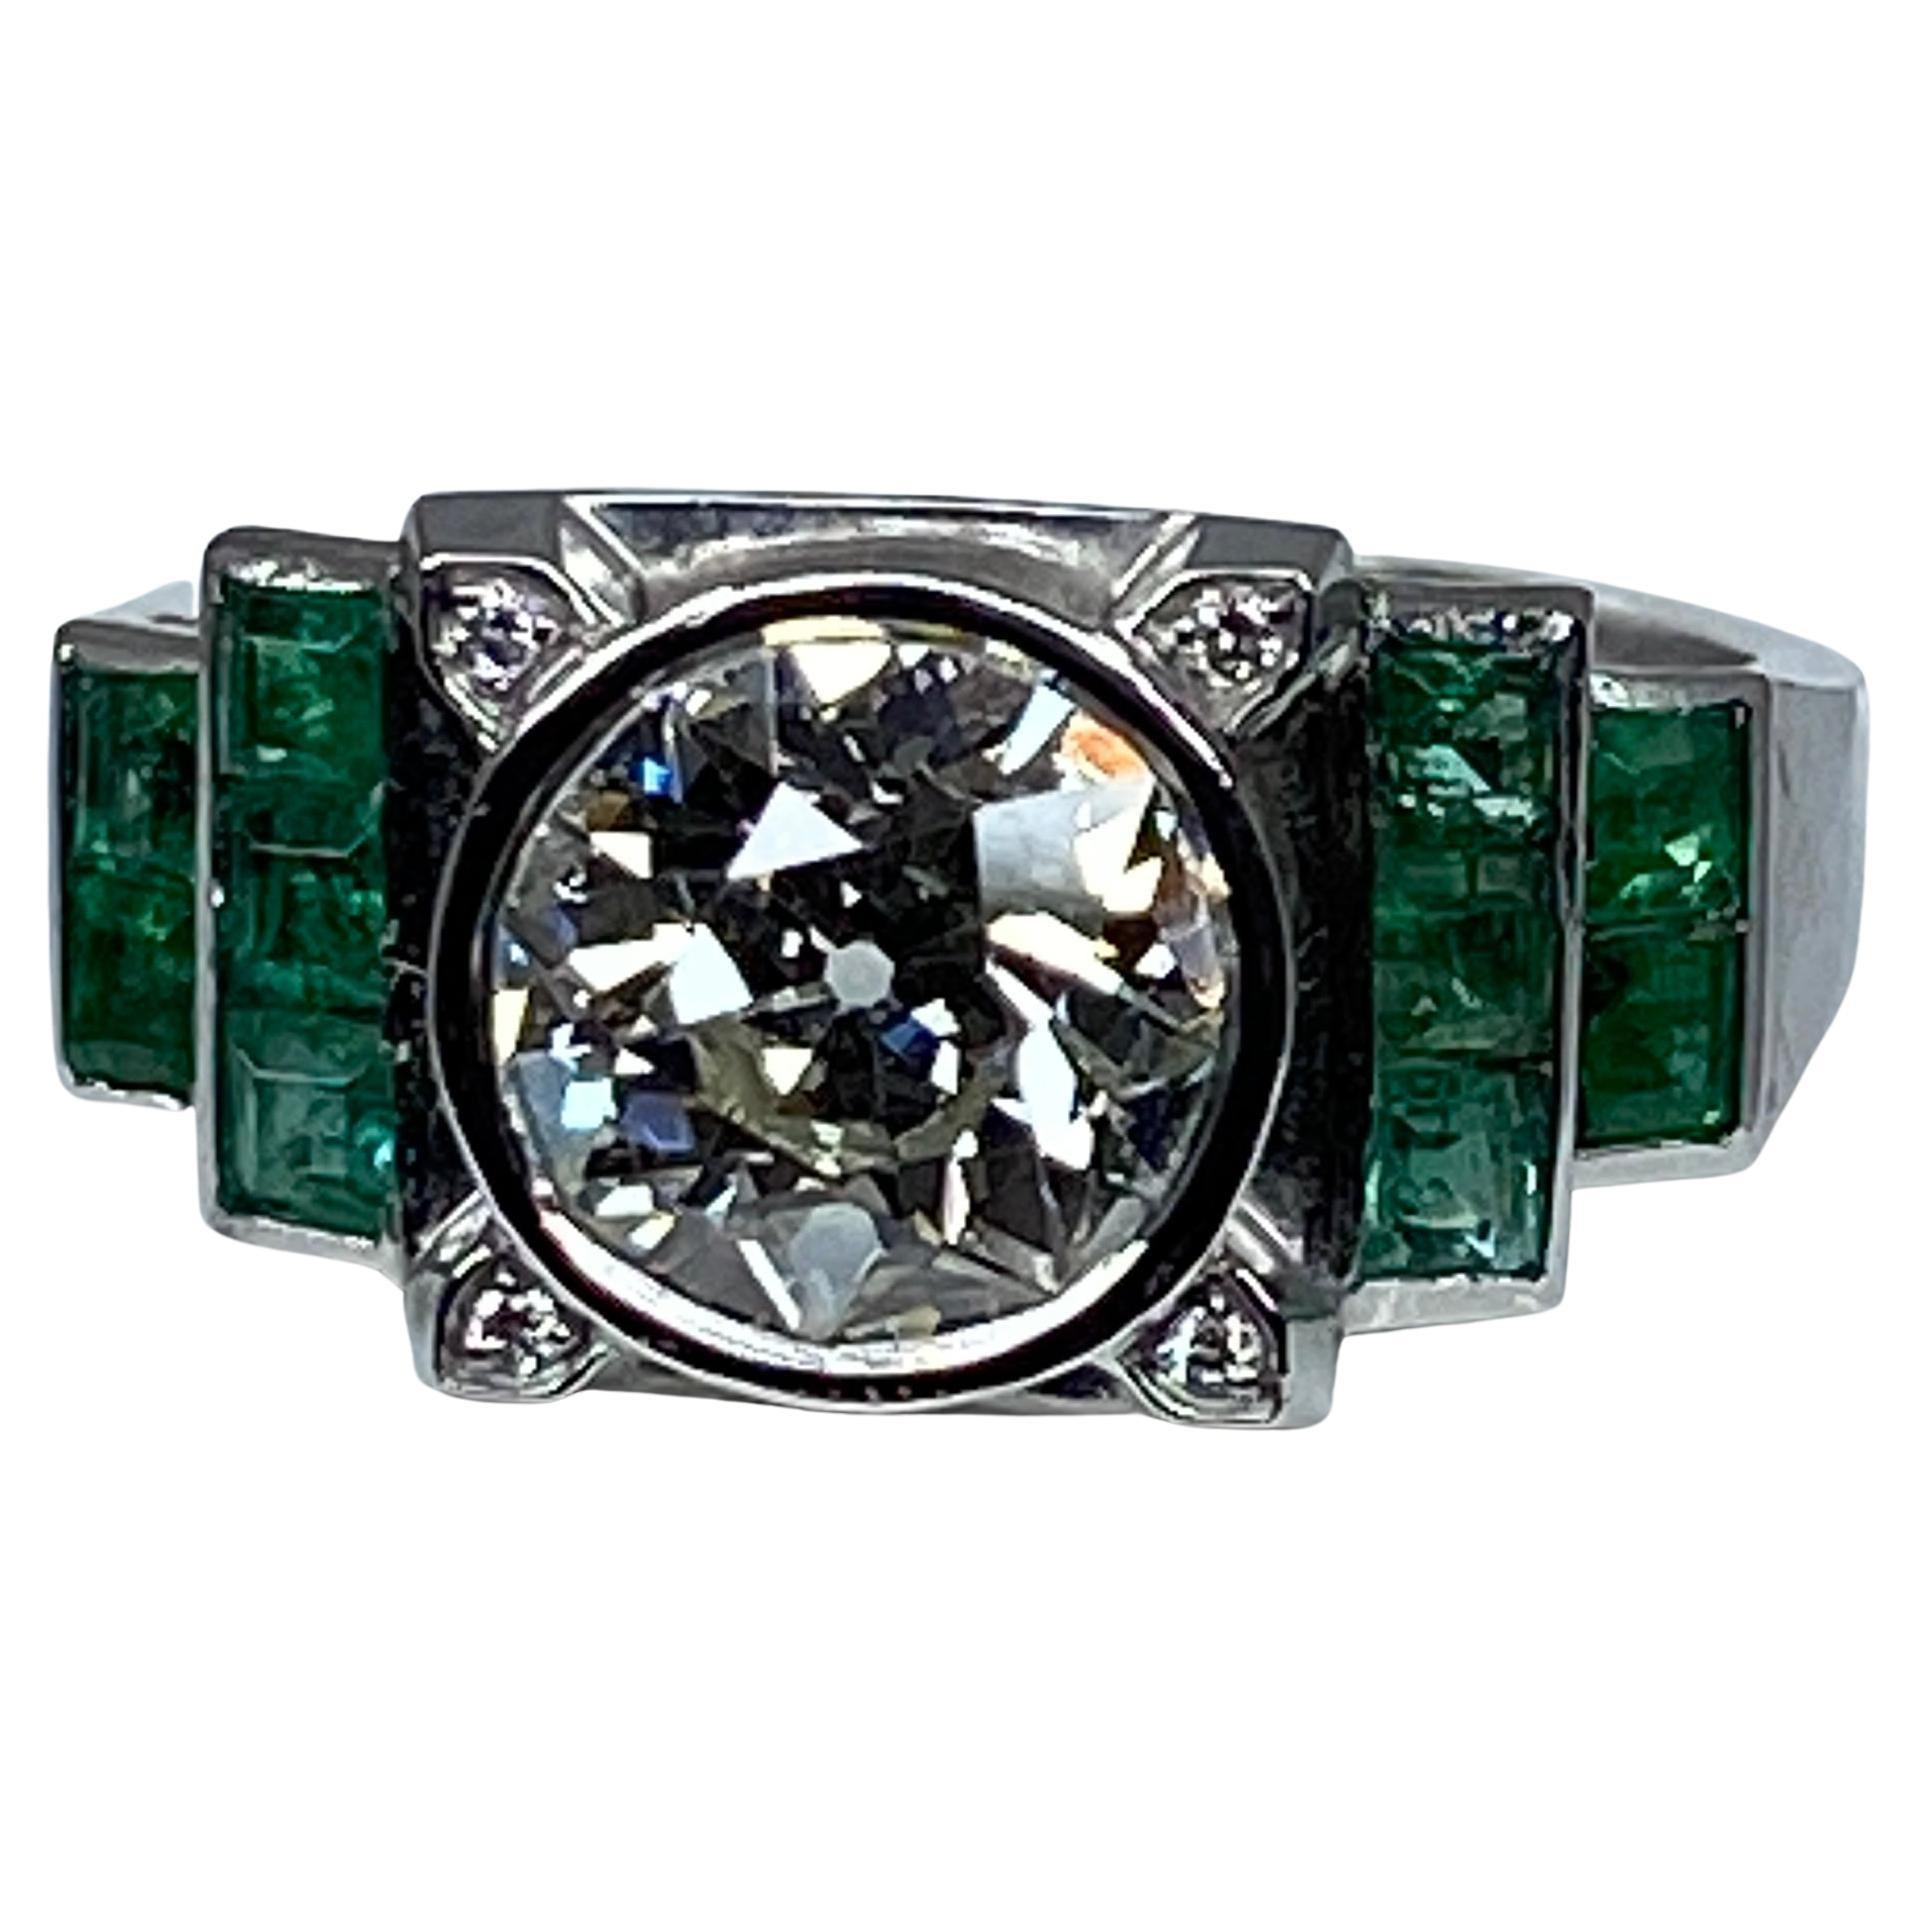 Platinium Engagement Ring Set with a 1.55 Carat Diamond Backed by Emeralds, 1900 For Sale